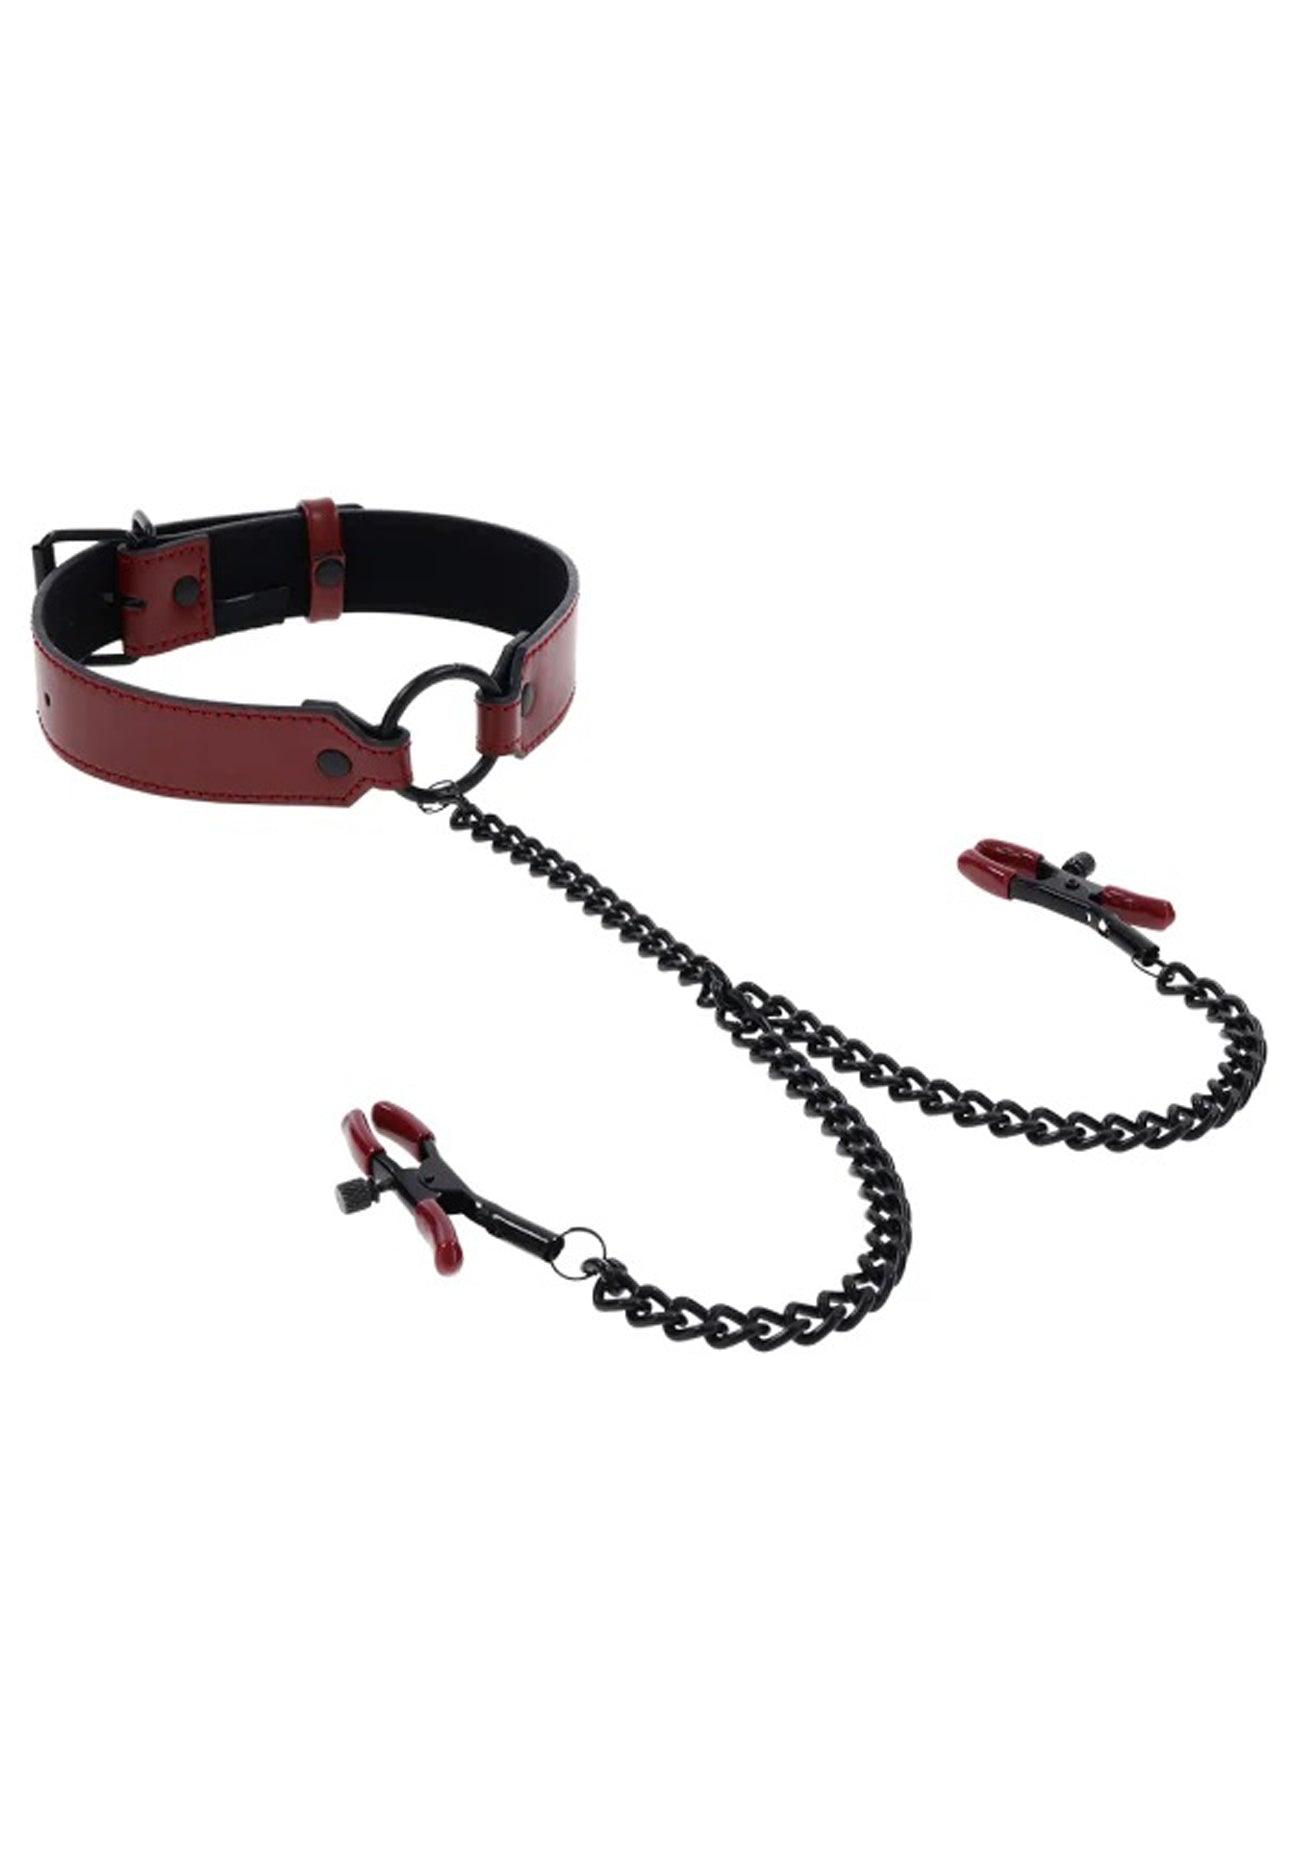 Saffron Collar With Nipple Clamps - Black/red - My Sex Toy Hub